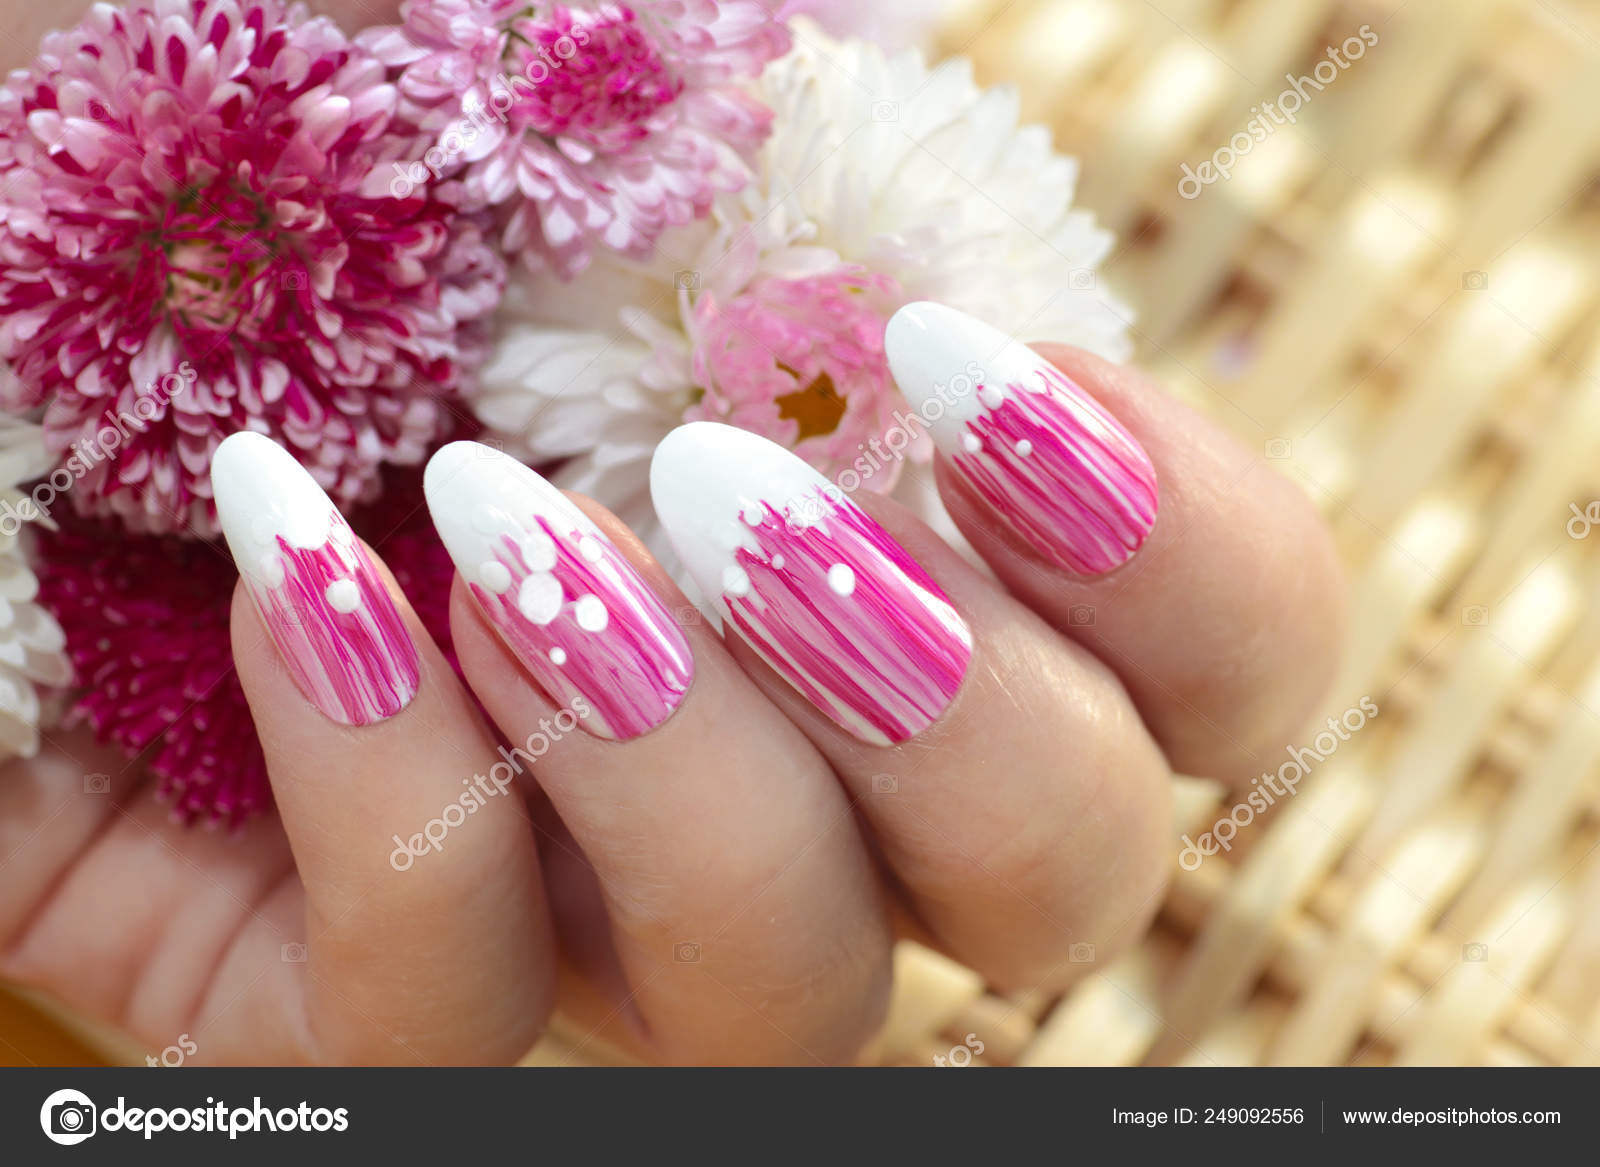 4 Beautiful Nail Designs That Go With Everything - Emma